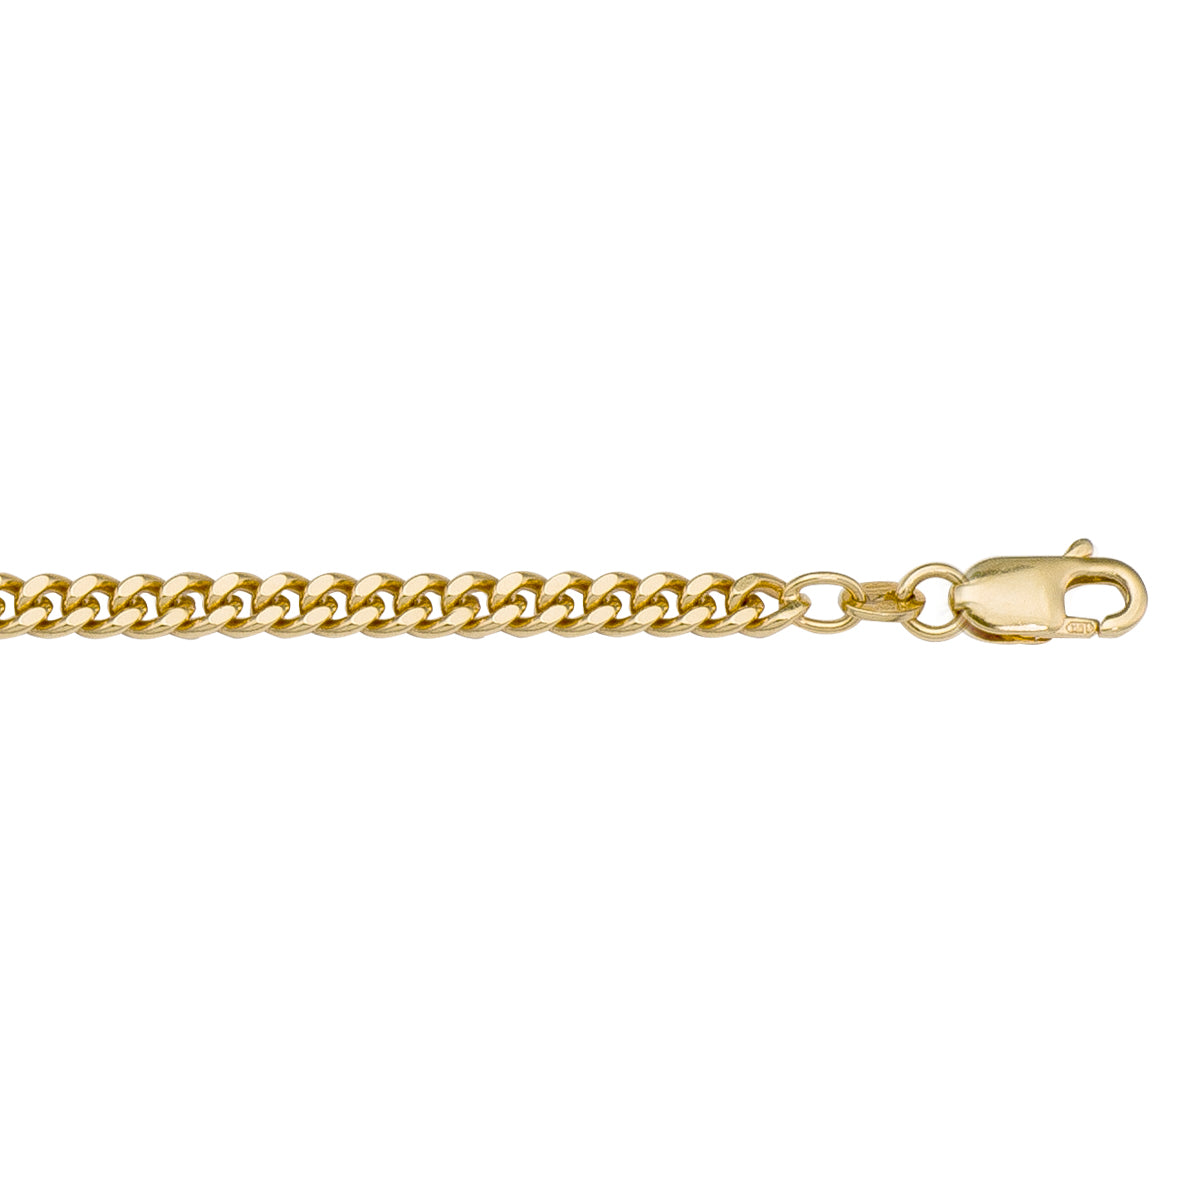 BRACELETS YELLOW GOLD SOLID DOMED LINK CHAIN